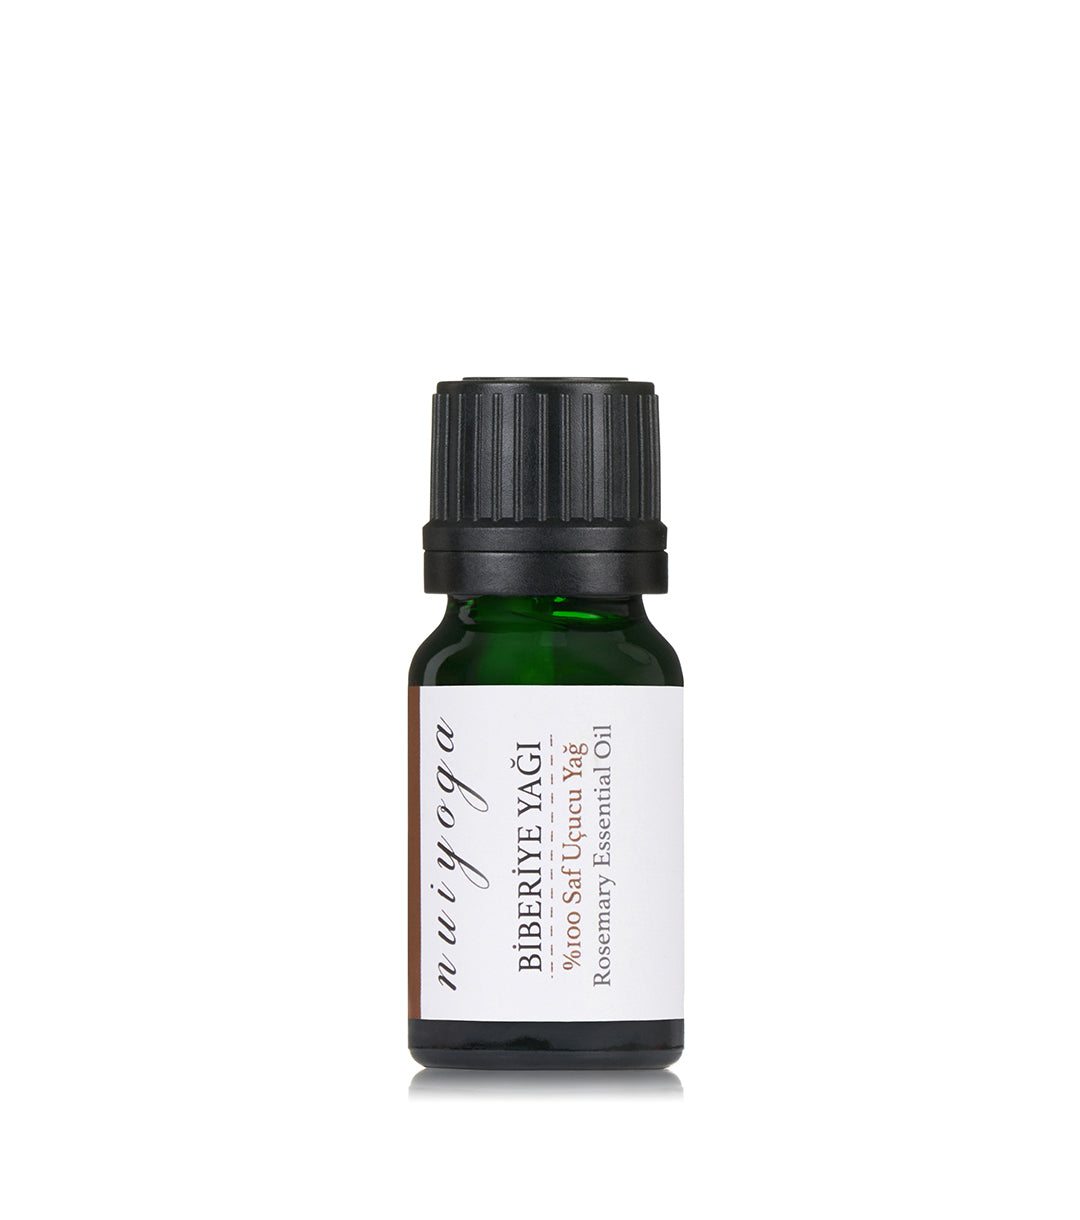 100% Natural Rosemary Essential Oil - 10 ml